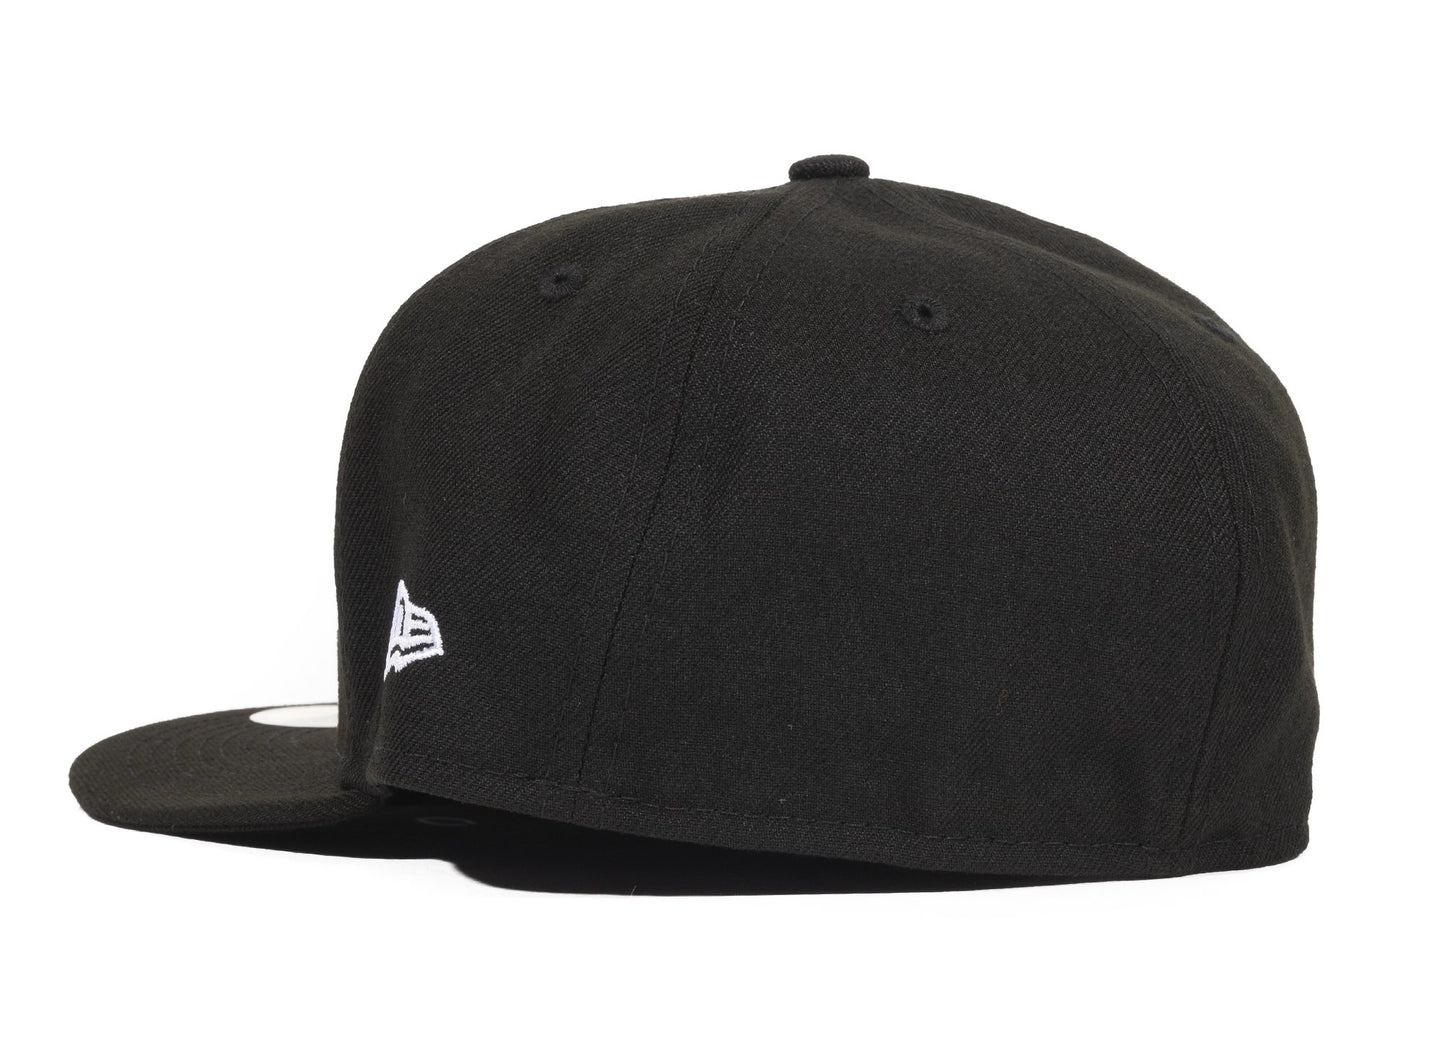 Paper Planes The Original Crown Fitted Hat w/ Black Undervisor